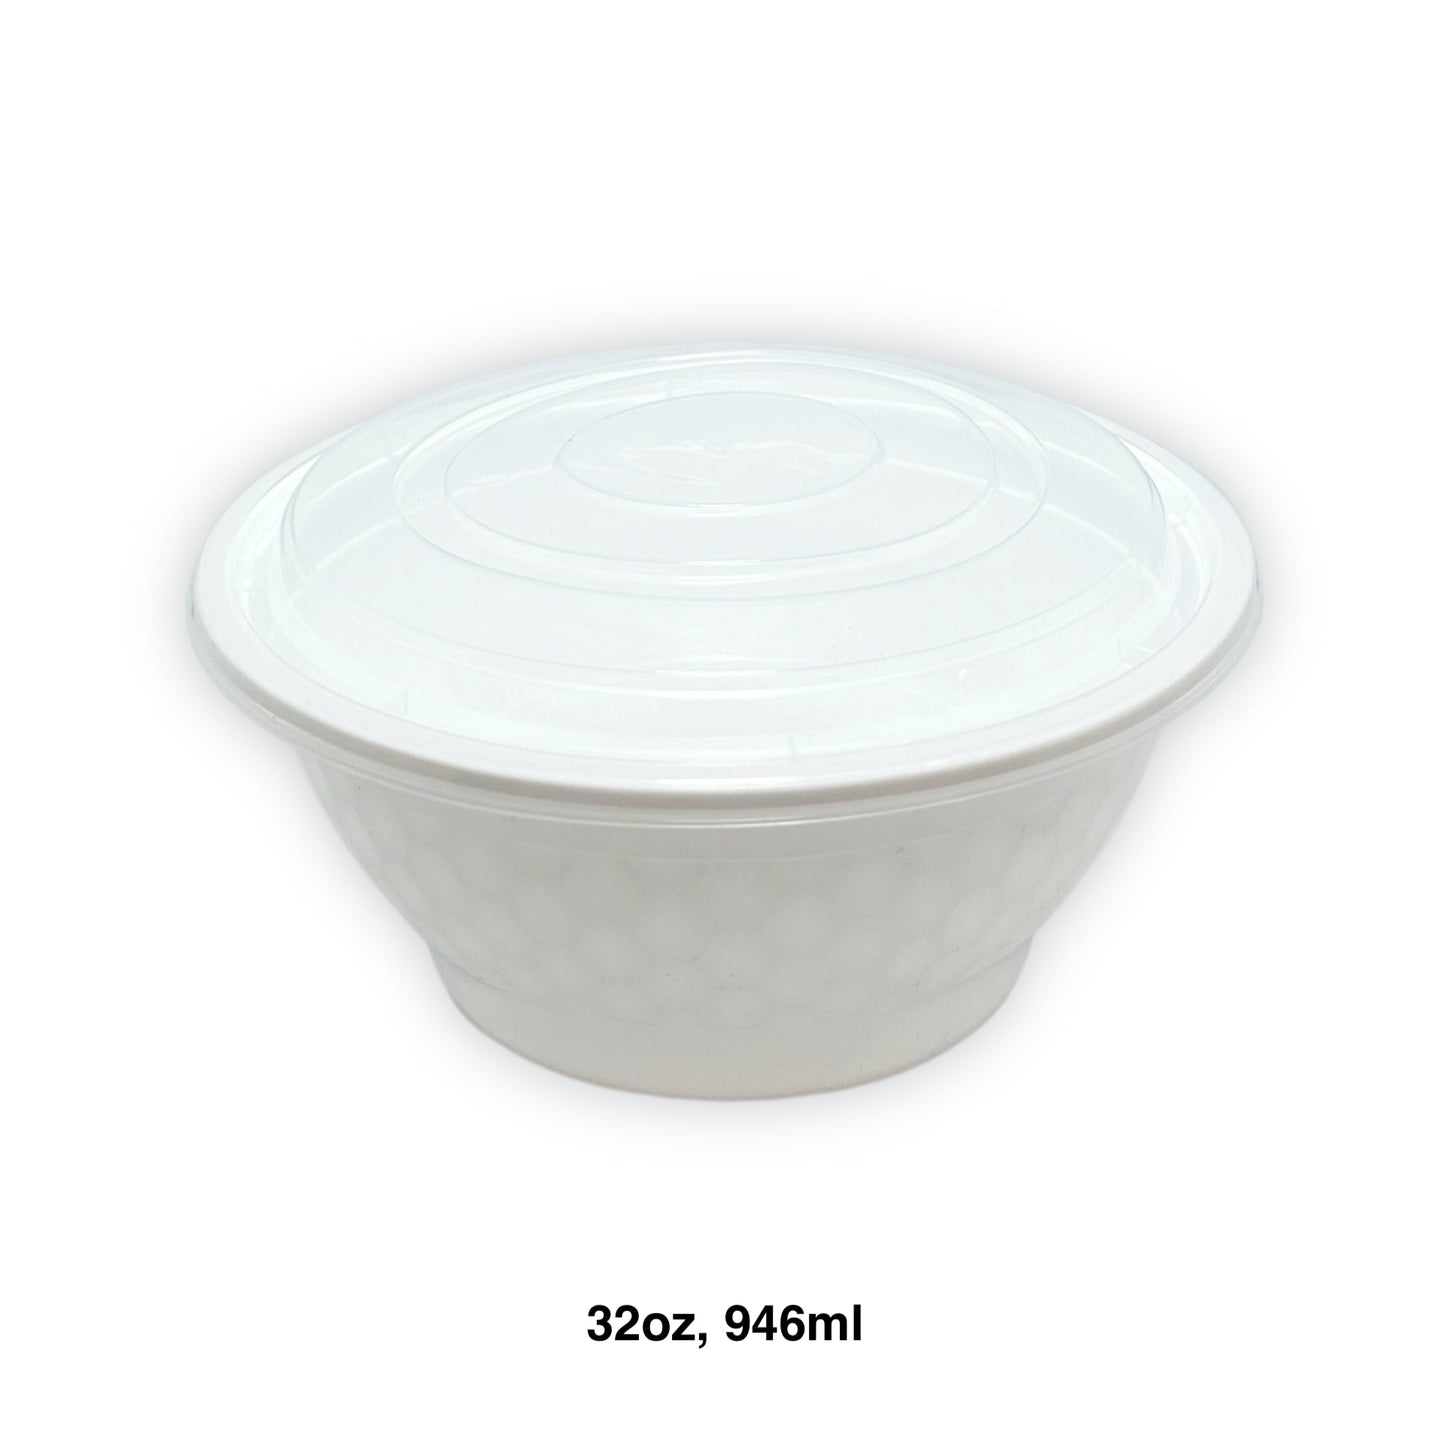 KIS-BO32G | 150sets 32oz, 946ml White PP Round Bowl with Clear Lids Combo; $0.189/set